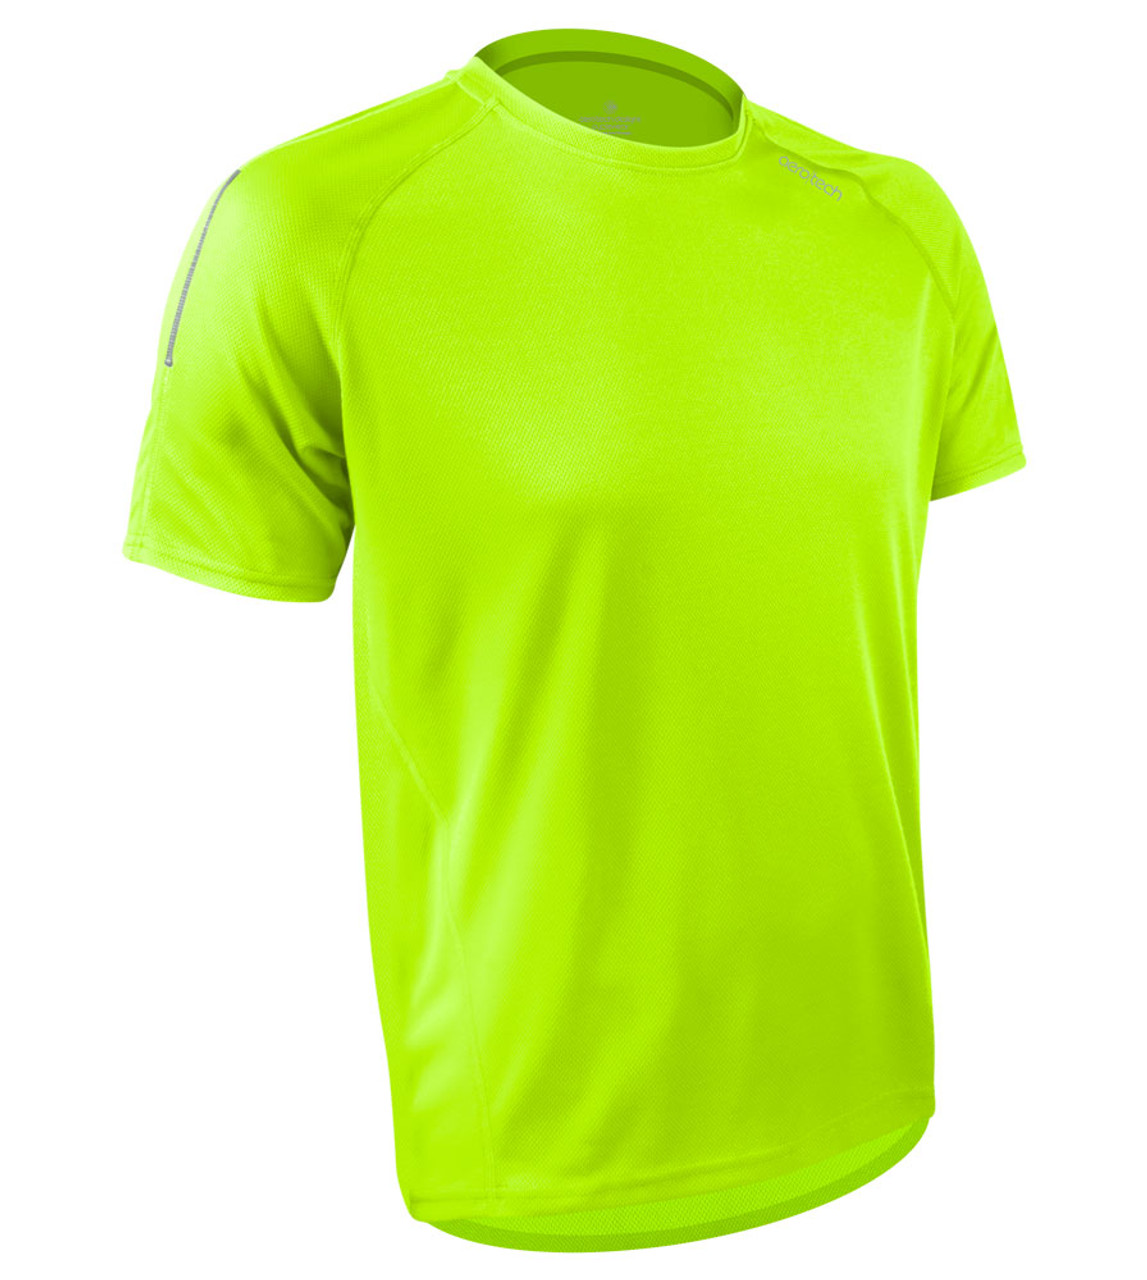 Men's Tech Performance Cycling Tee Shirt with Pocket and Reflective Trim